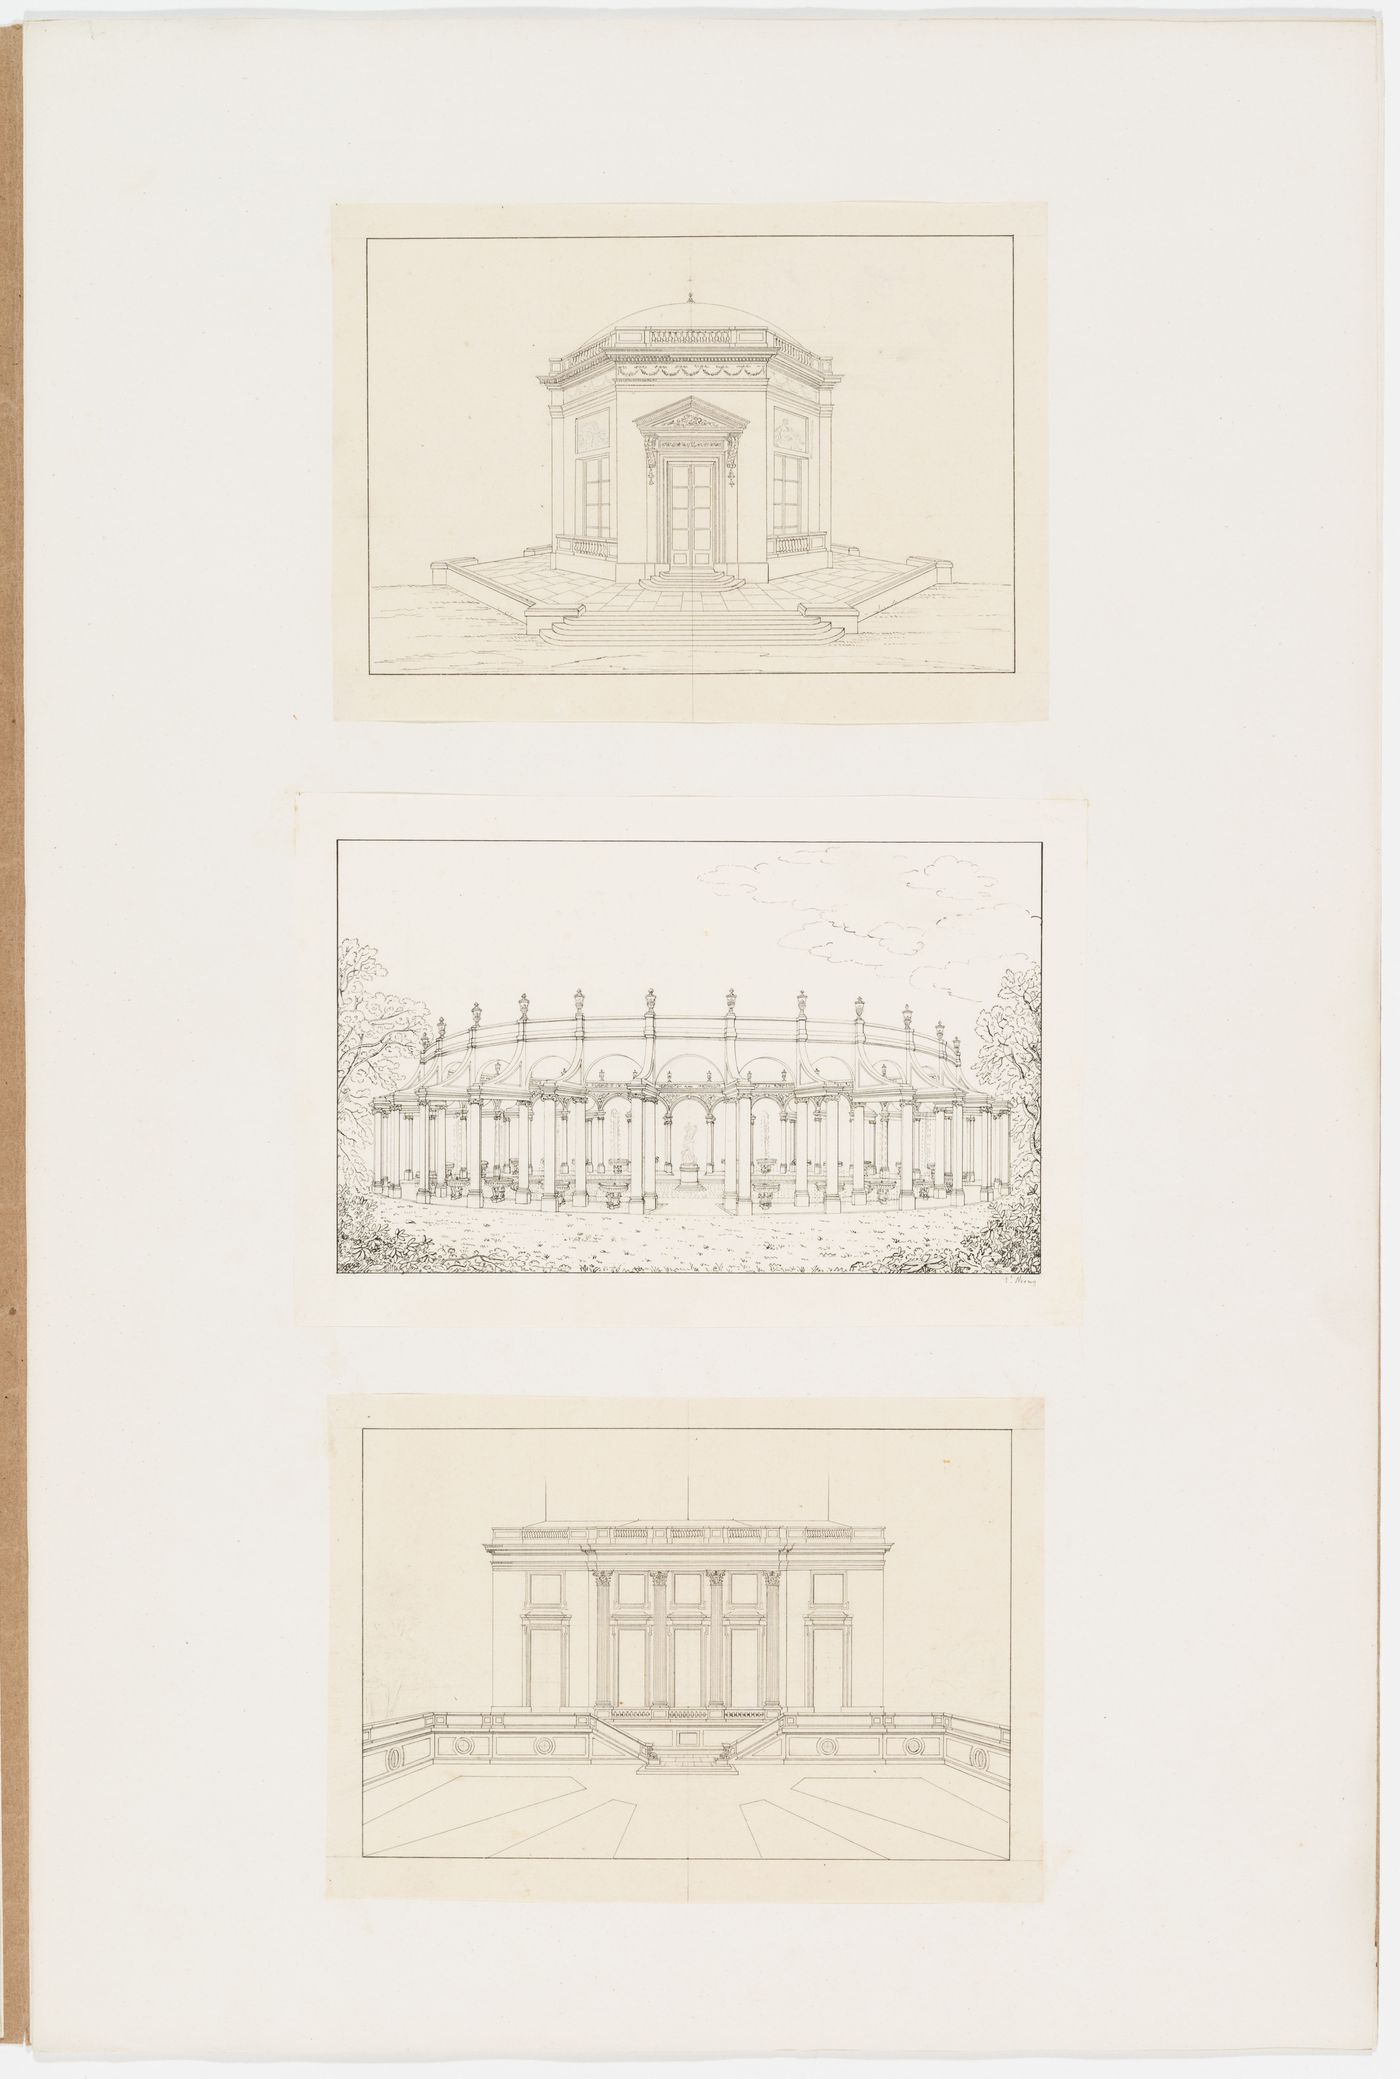 Exterior elevations of a domed hexagonal building on a podium, an oval shaped colonnade surrounding a pool containing fountains and a central sculpture, and a forecourt and classical building with bays flanked by four colossal columns